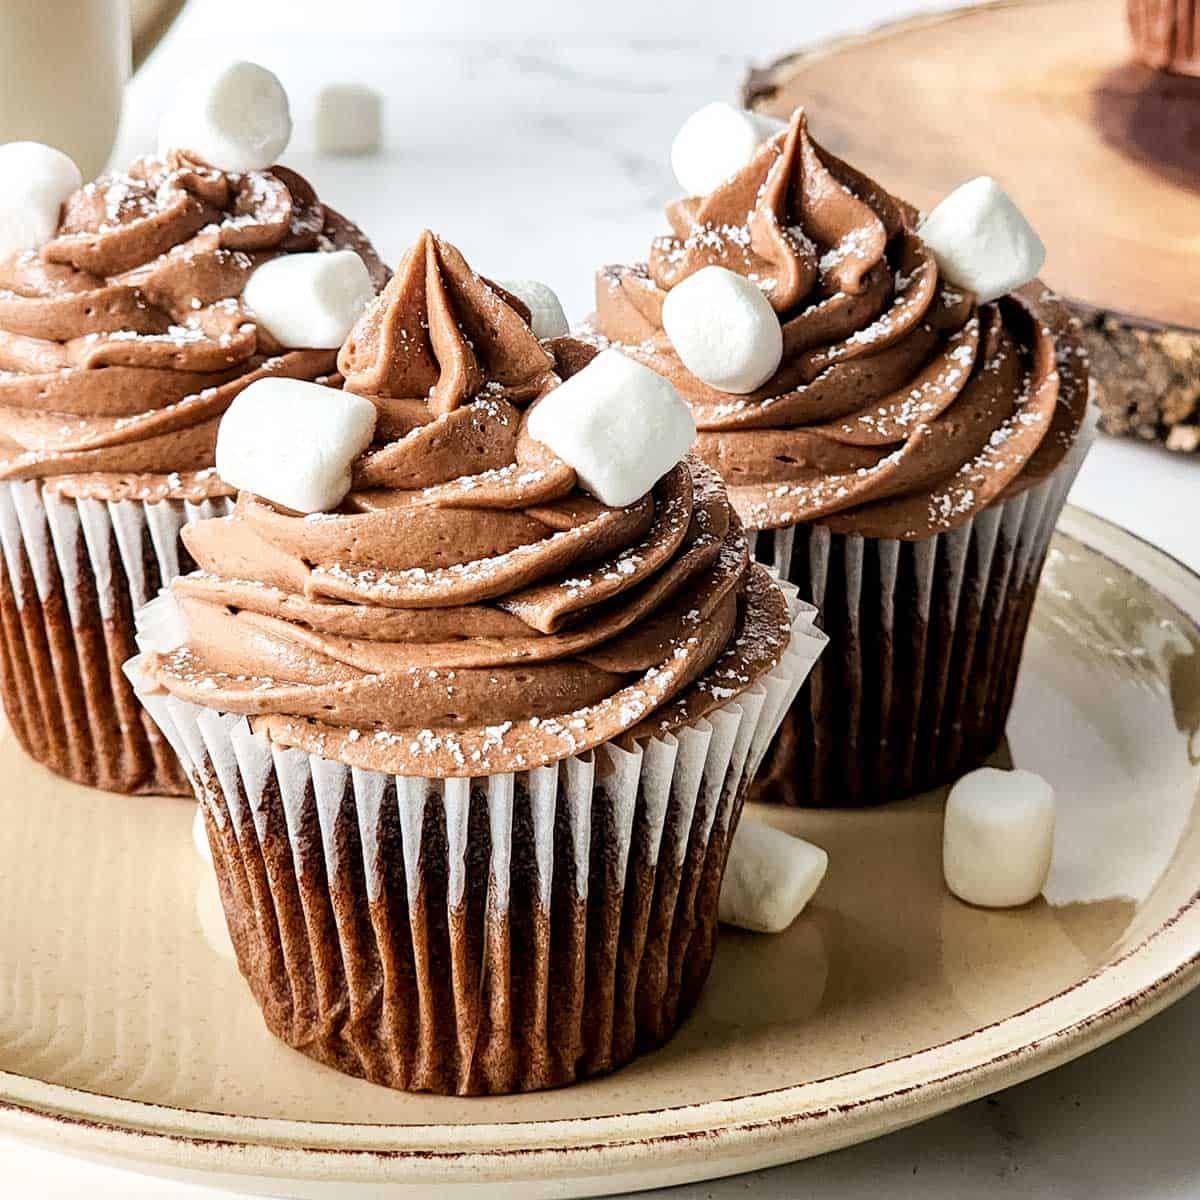 Sizzling Chocolate Cupcakes with Cocoa Buttercream